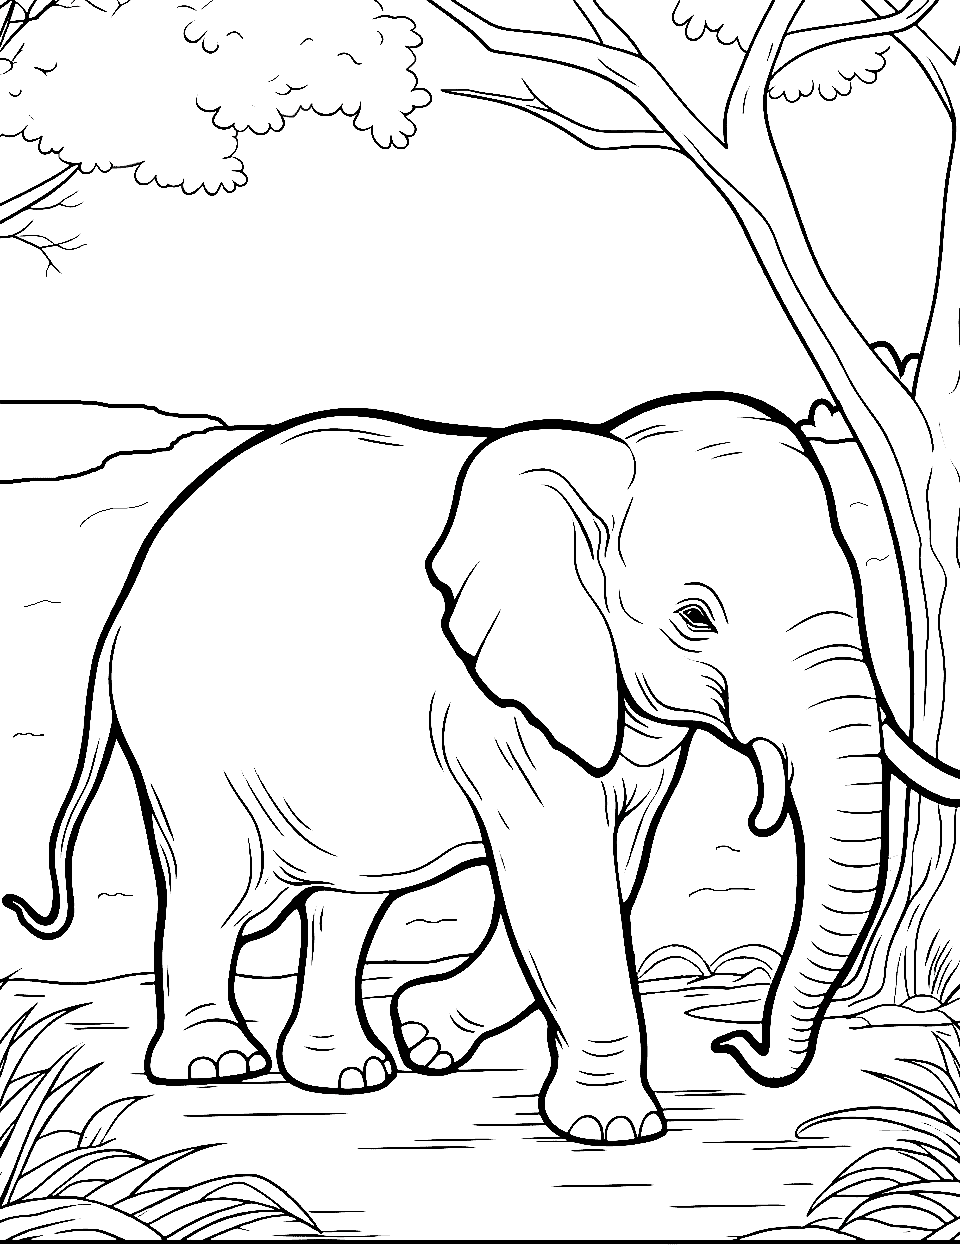 Elephant's Lakeside Serenity Coloring Page - An elephant strolling near a lake.